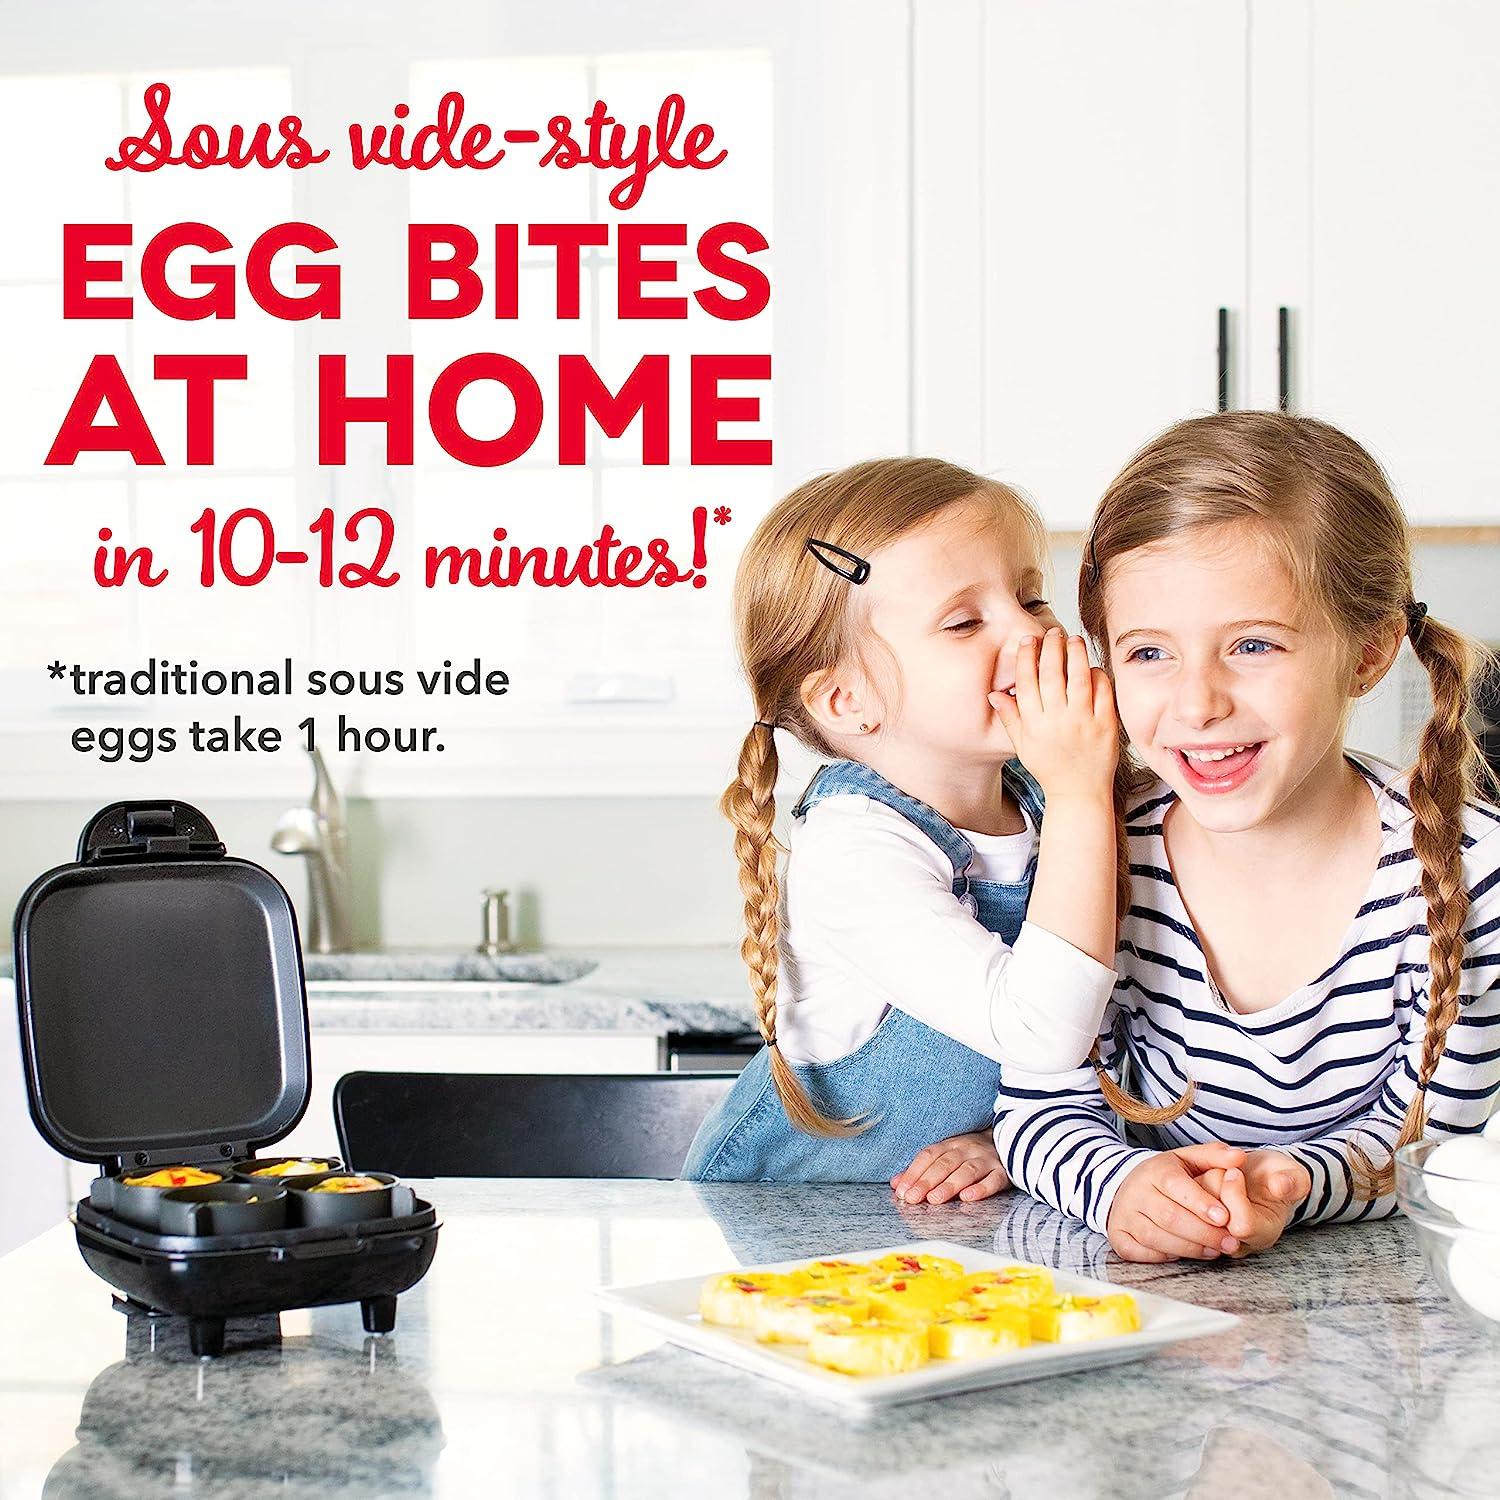 DASH Deluxe Style Egg Bite Maker with Silicone Molds (Drop Ship